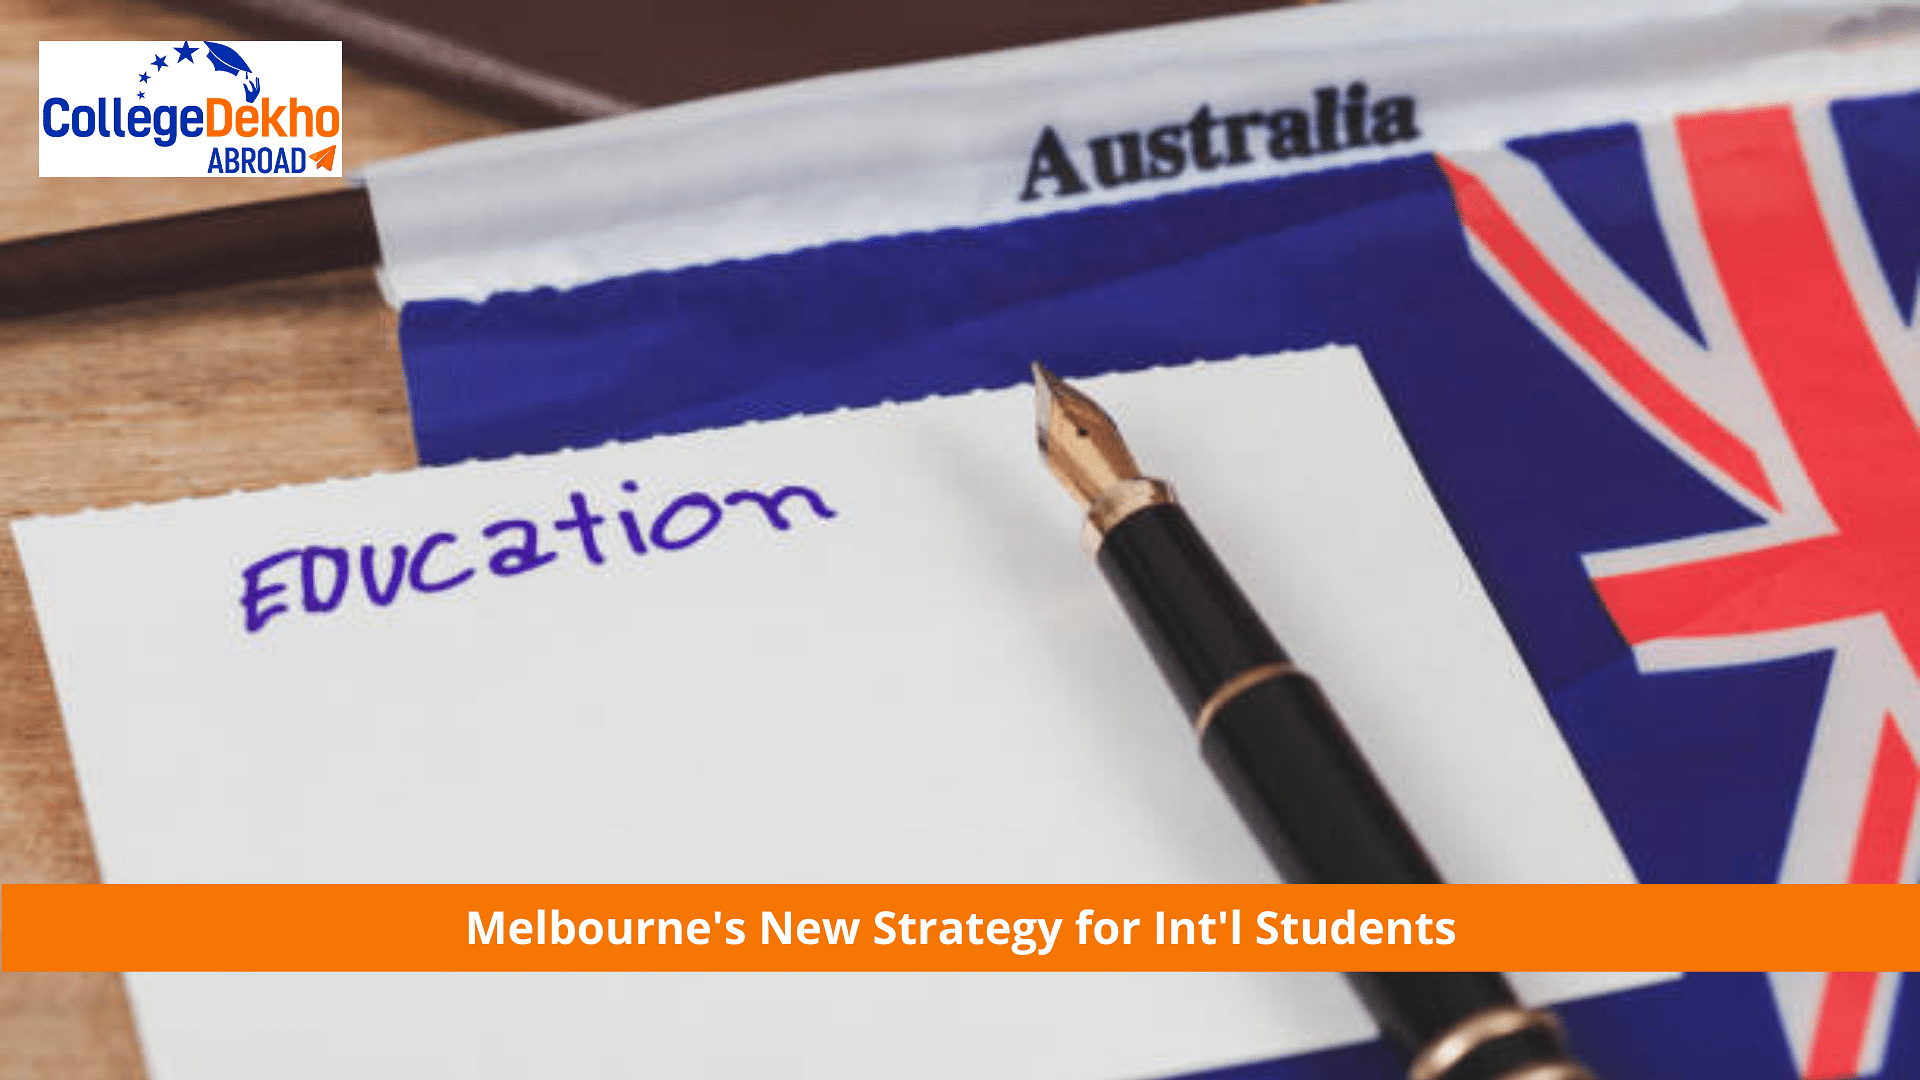 Melbourne's New Strategy for Int'l Students